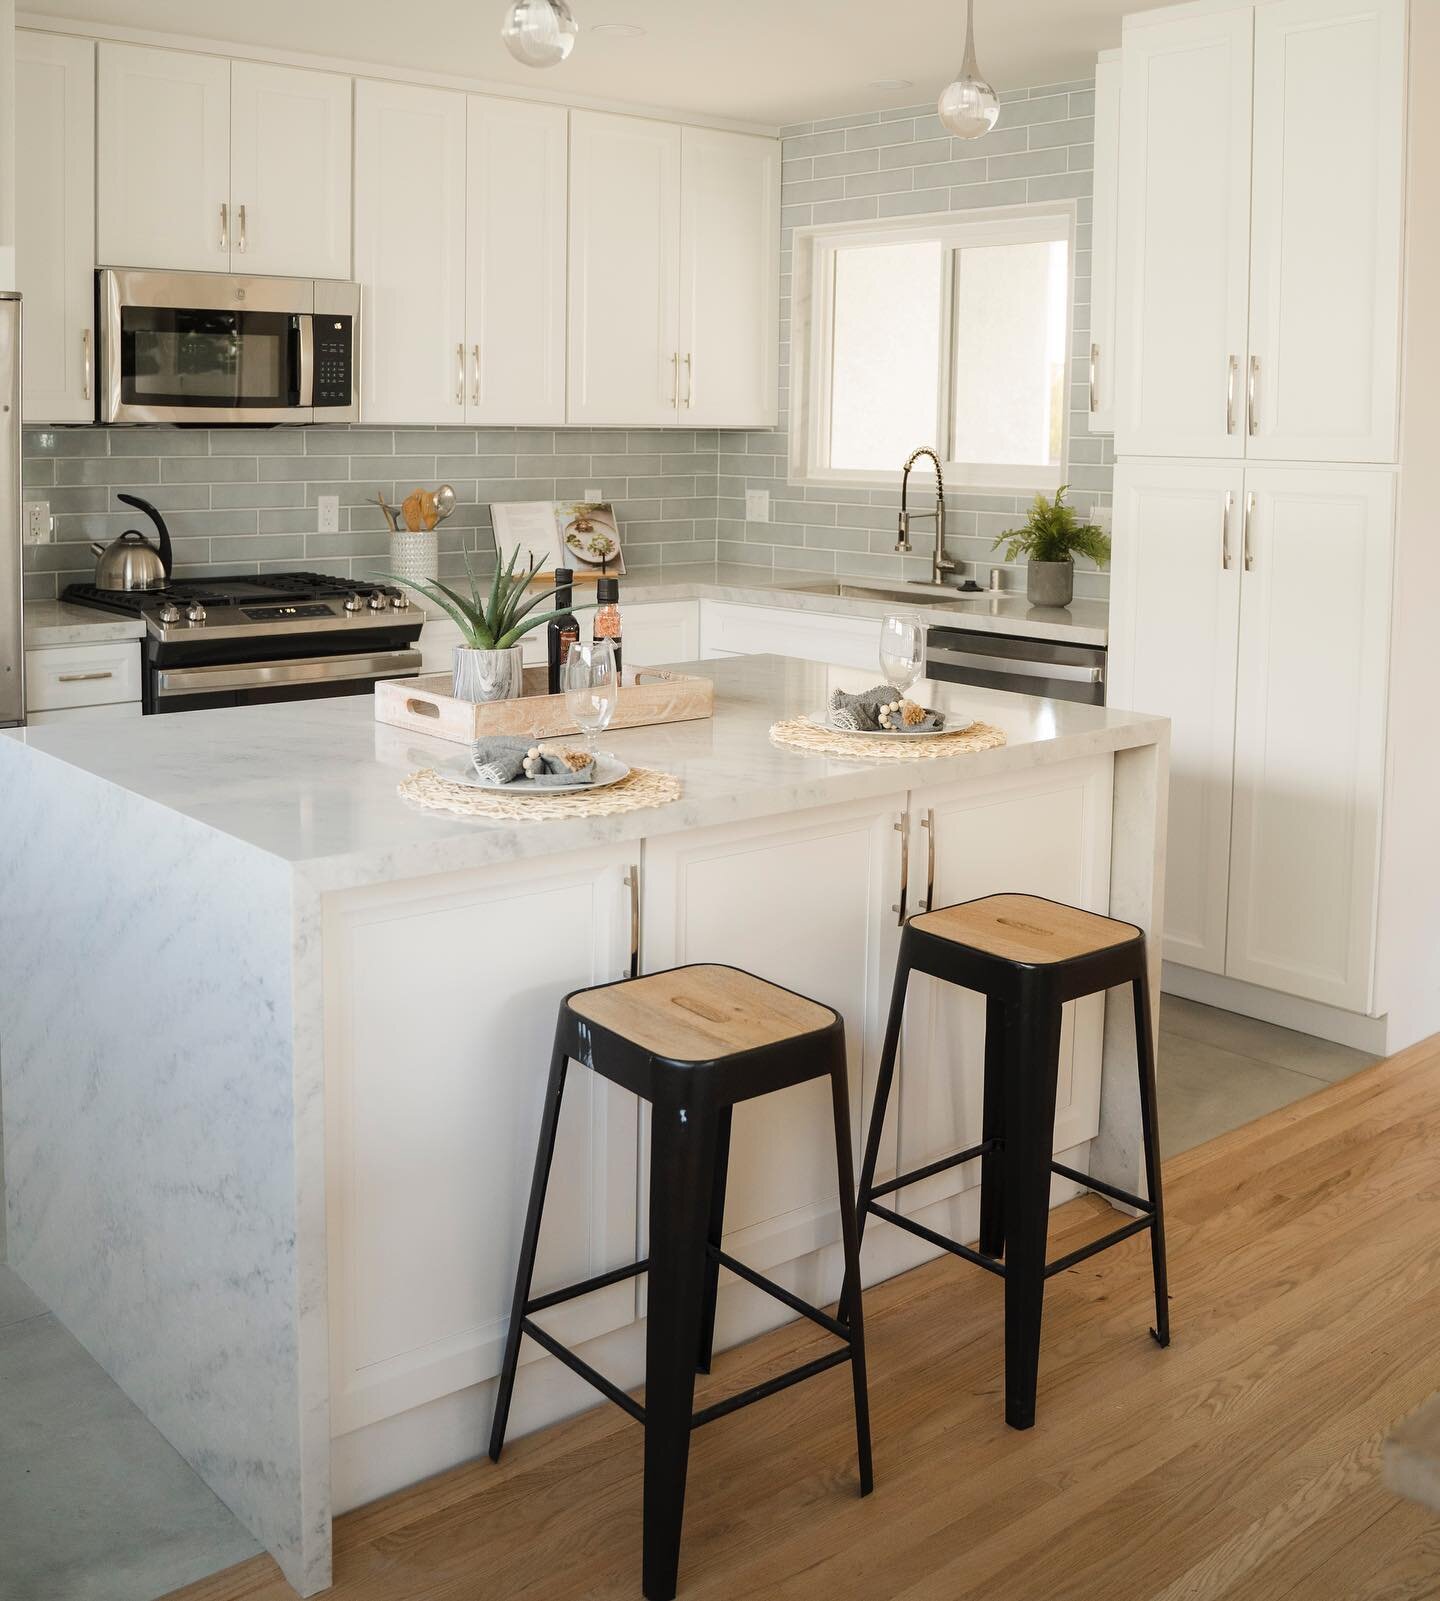 For Sale -&gt; The dreamiest kitchen you&rsquo;ve ever cooked in👩&zwj;🍳 Make yourself at home no matter how big or small, with Signature Staging you can see yourself here✨